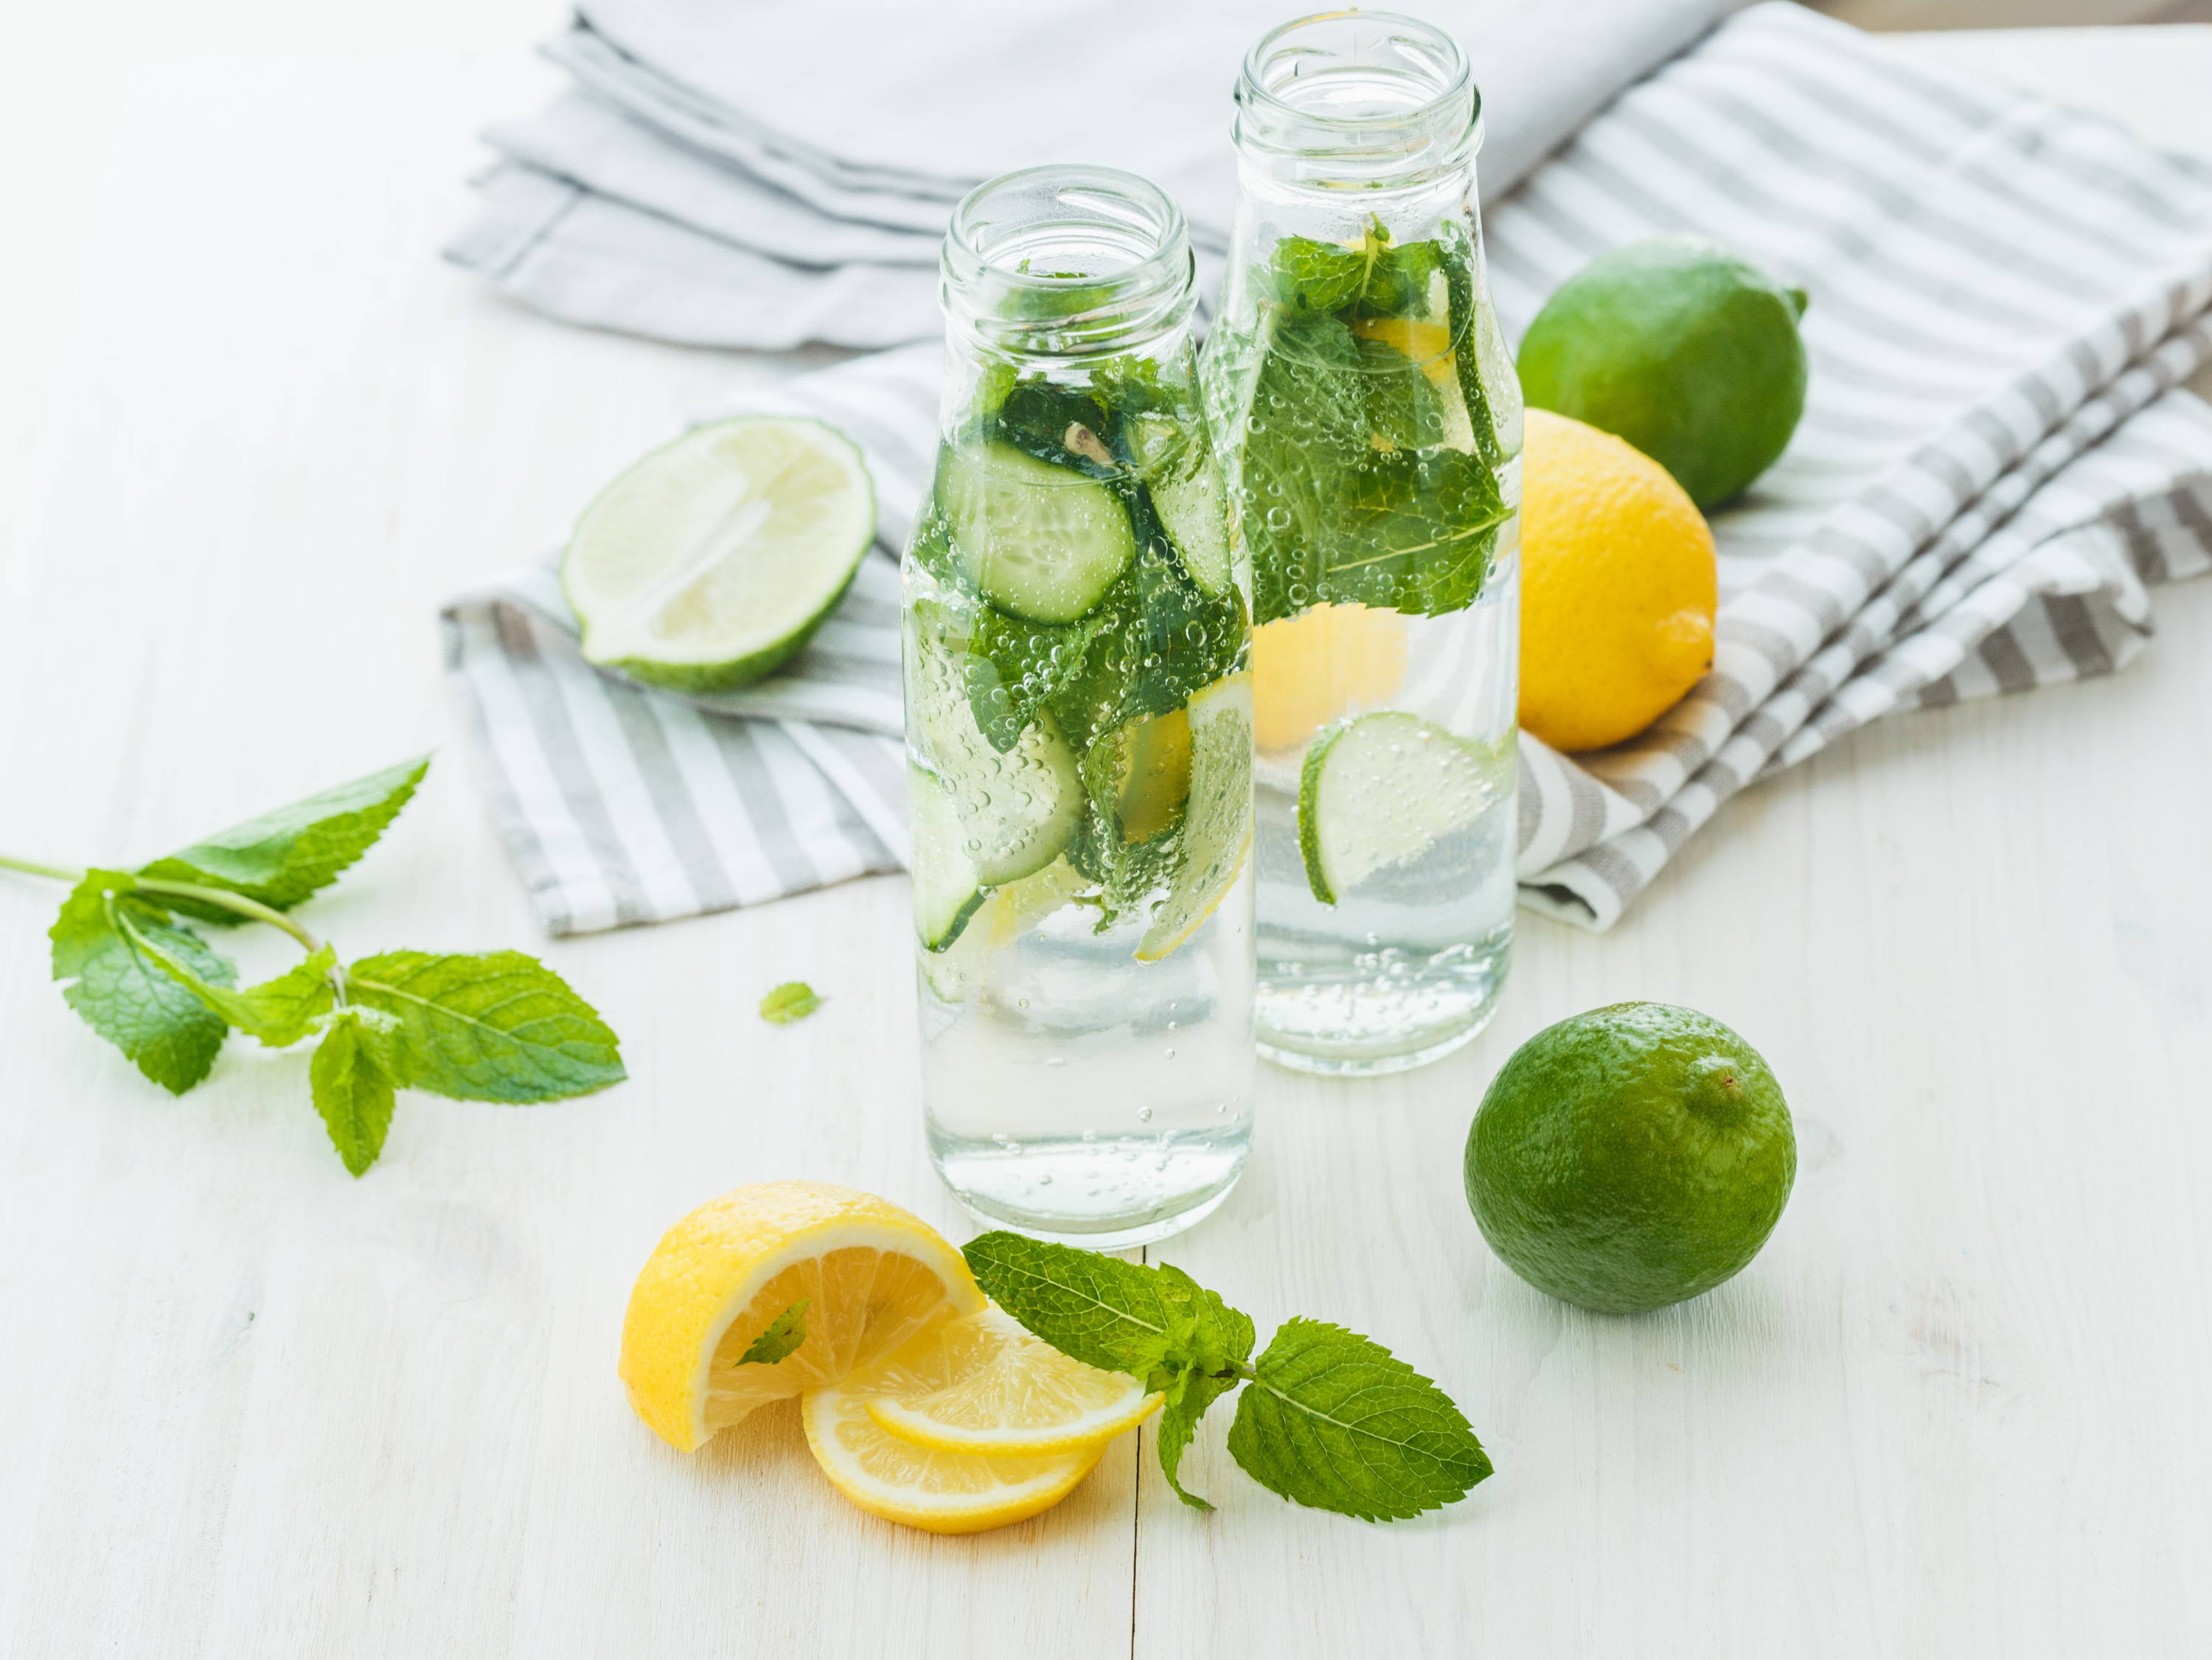 Lemon and mint water